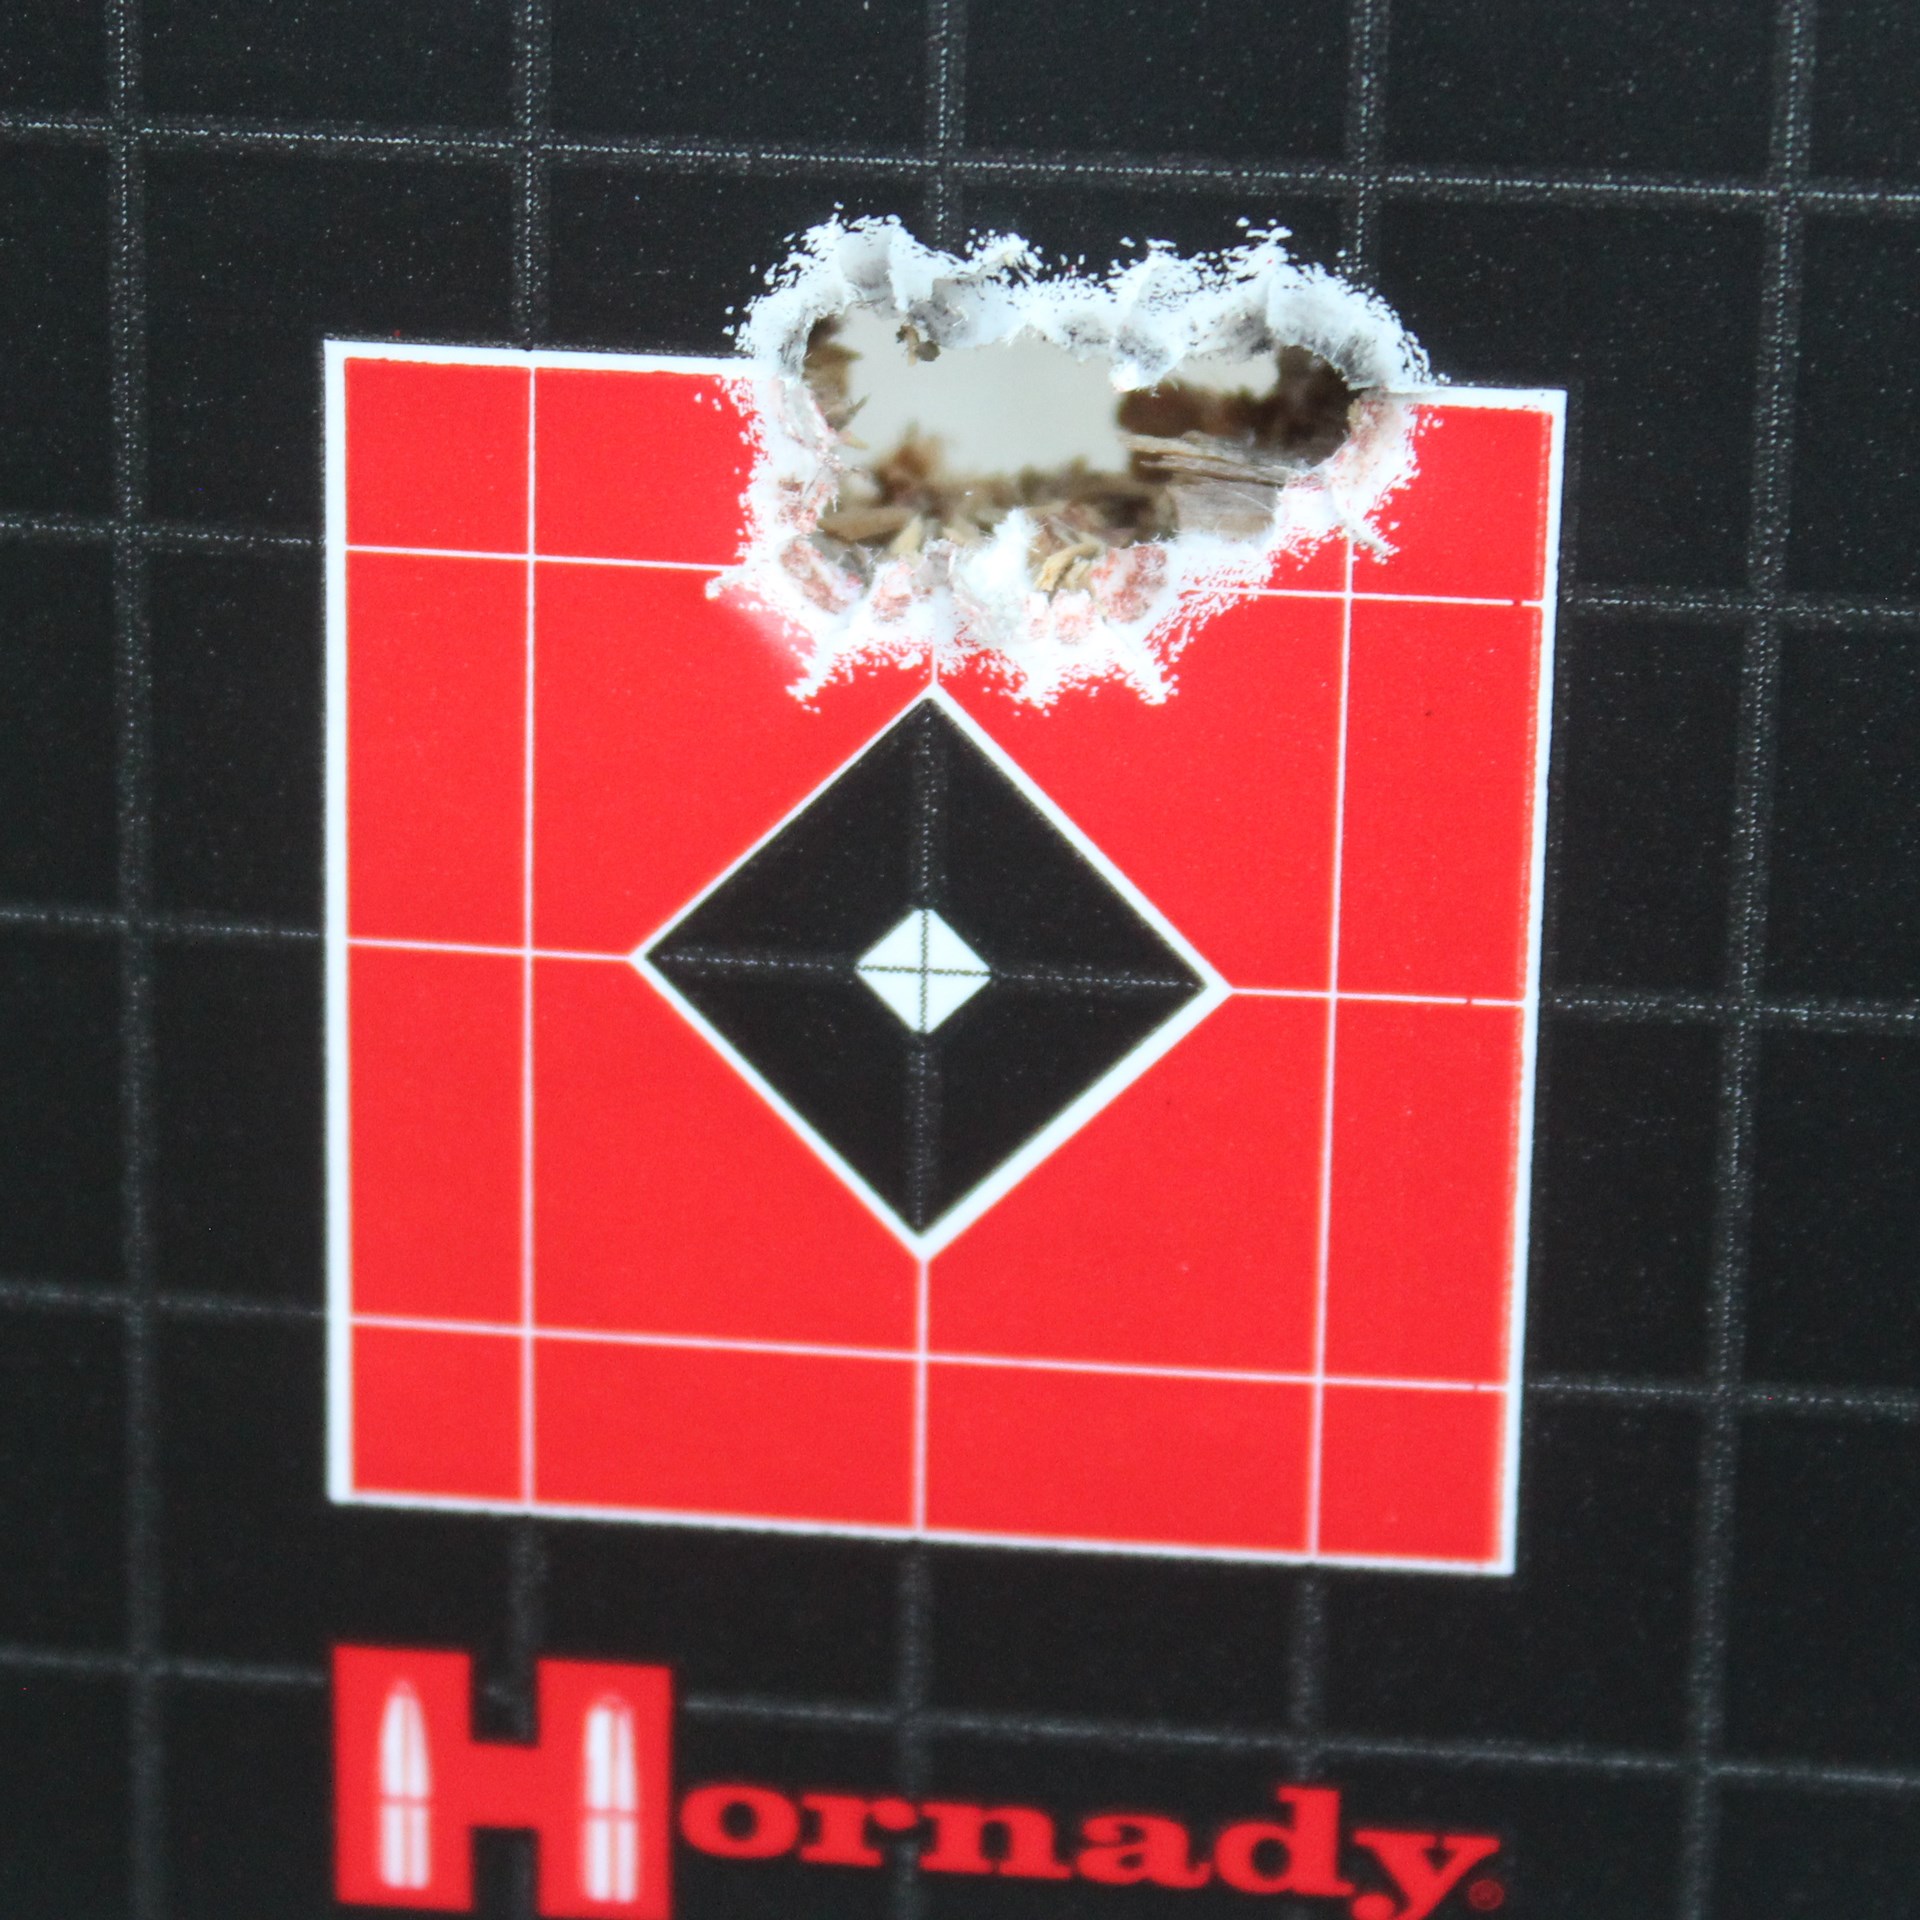 Although the average group was larger, the X Custom produced sub-half-inch five-shot groups with both Barnes 168-grain LRX and Hornady 162-grain ELD-X. This is one of the best of the 25 groups measured.